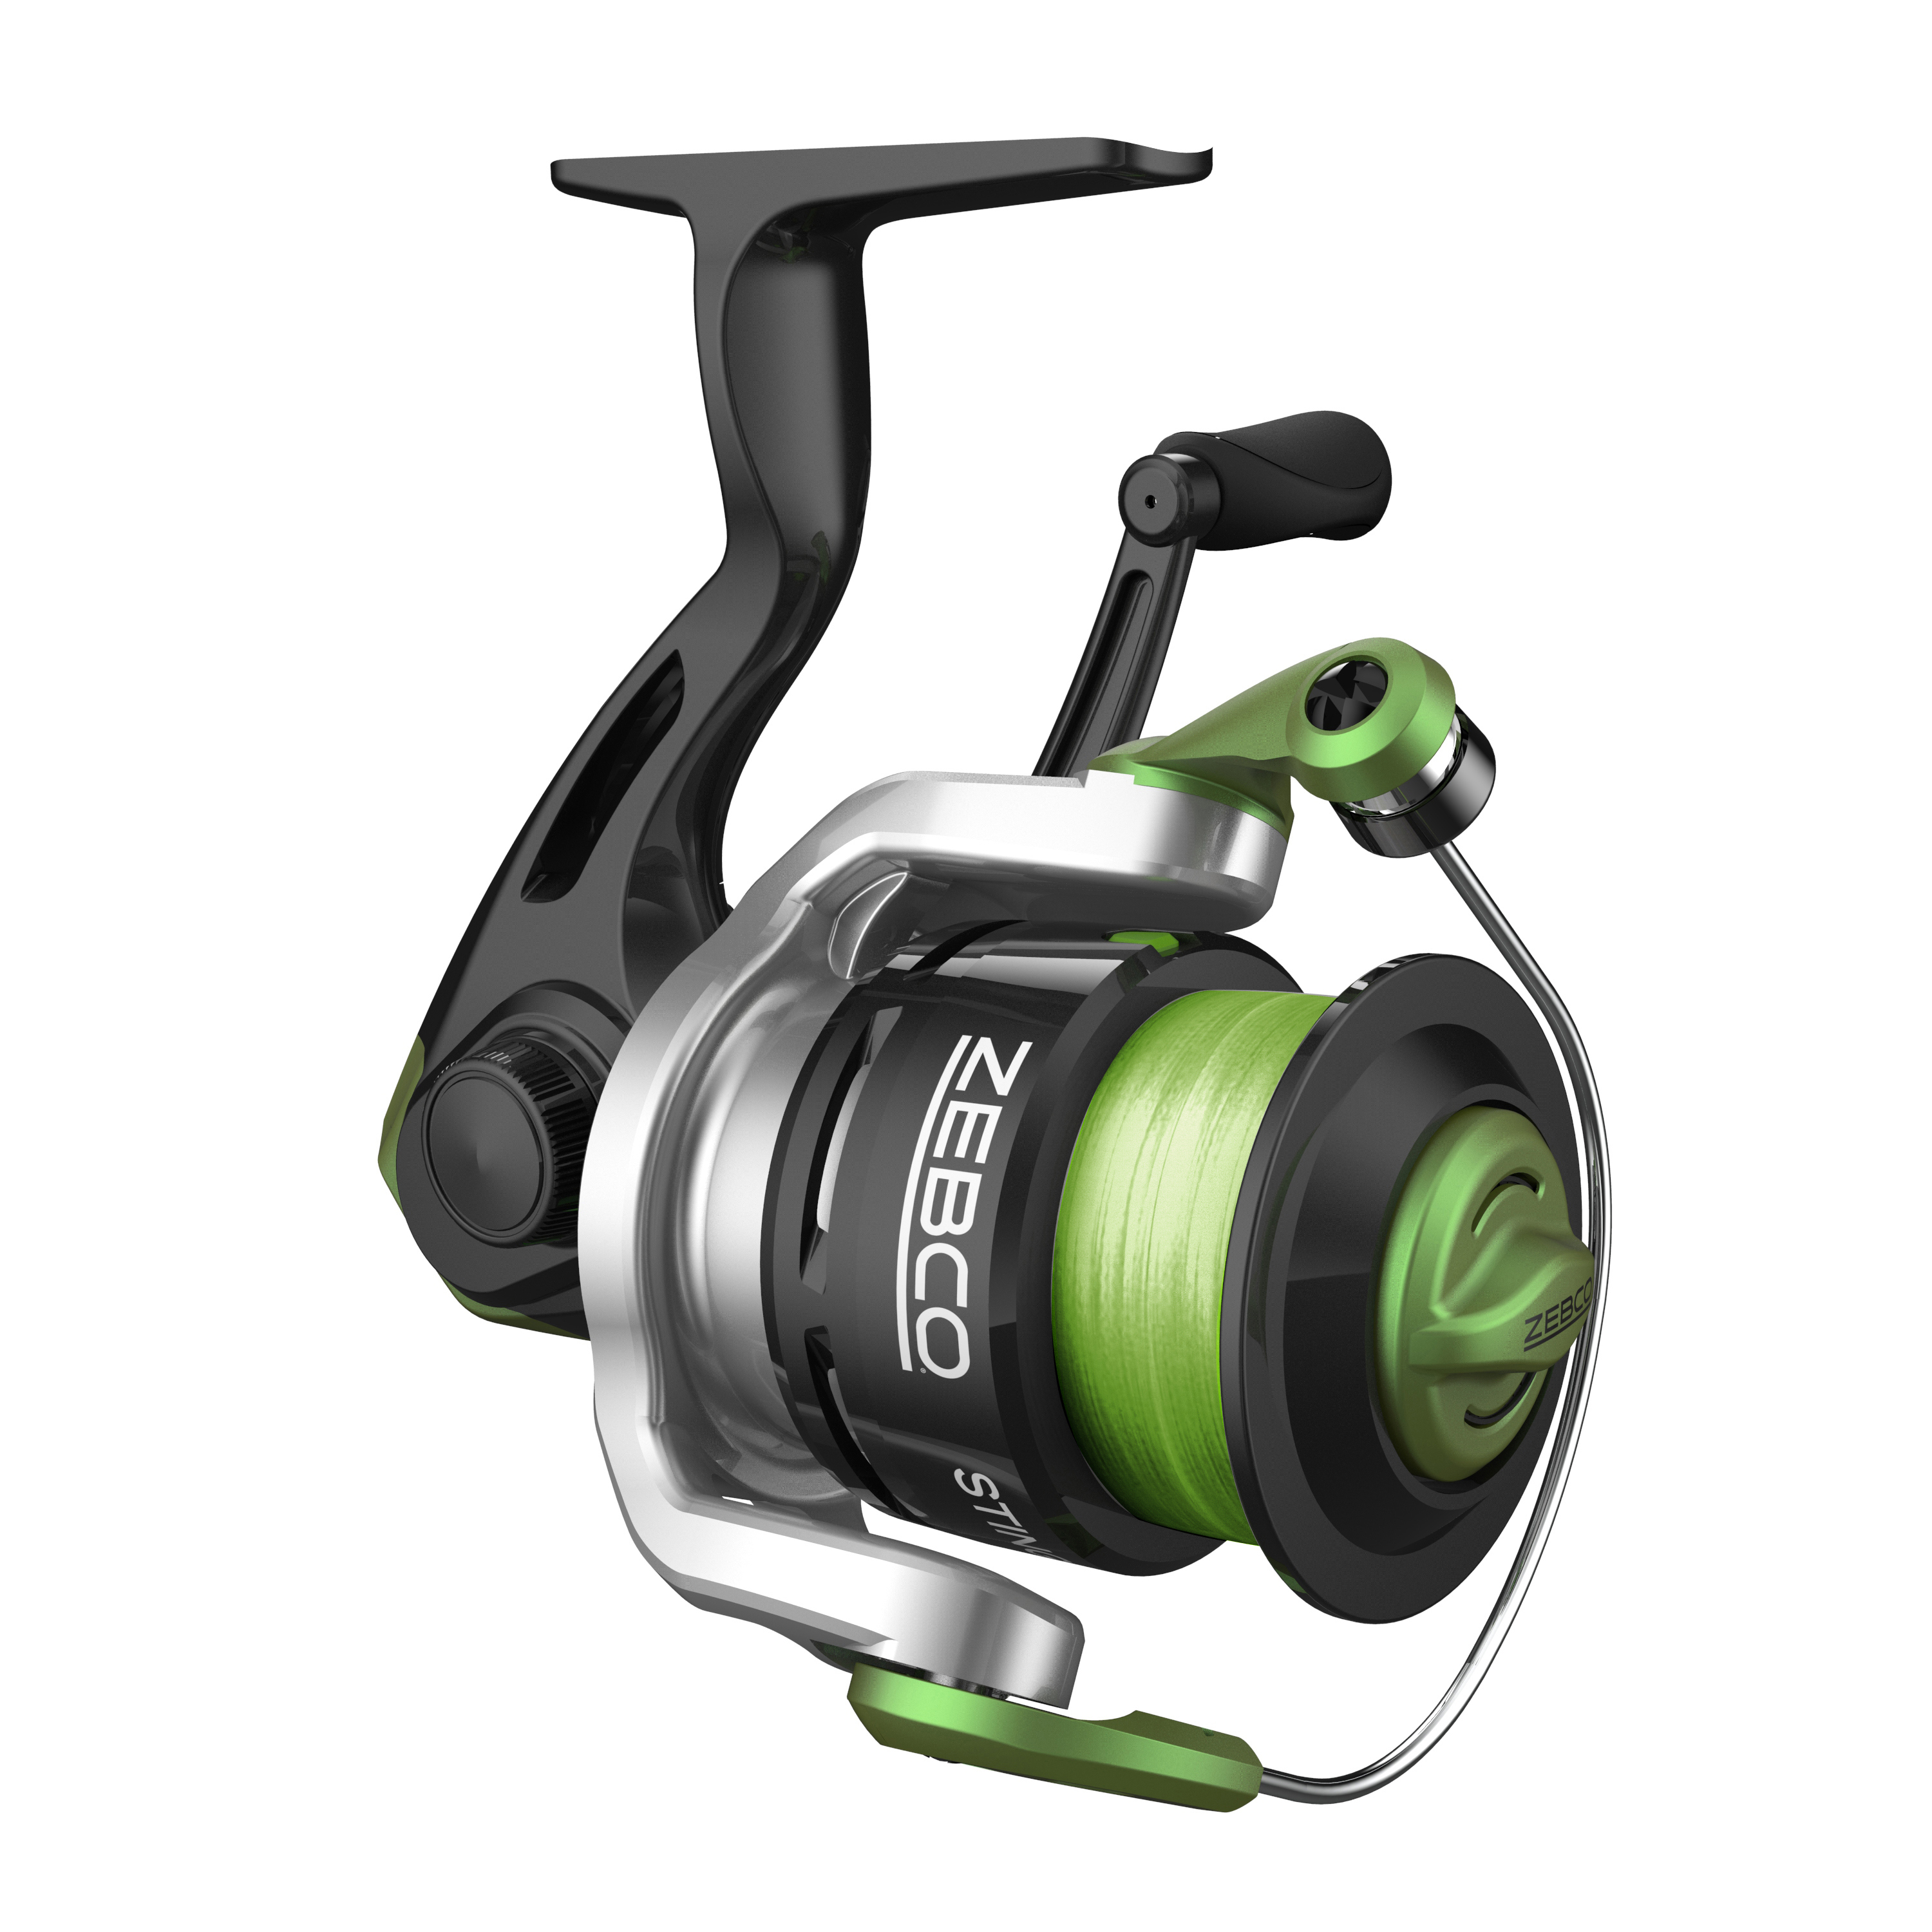  Zebco Stinger Spinning Fishing Reel, Size 10 Reel, Changeable  Right- or Left-Hand Retrieve, 4.3:1 Gear Ratio, All-Metal Gears,  Pre-Spooled with 6-Pound Zebco Line, Silver/Black : Sports & Outdoors